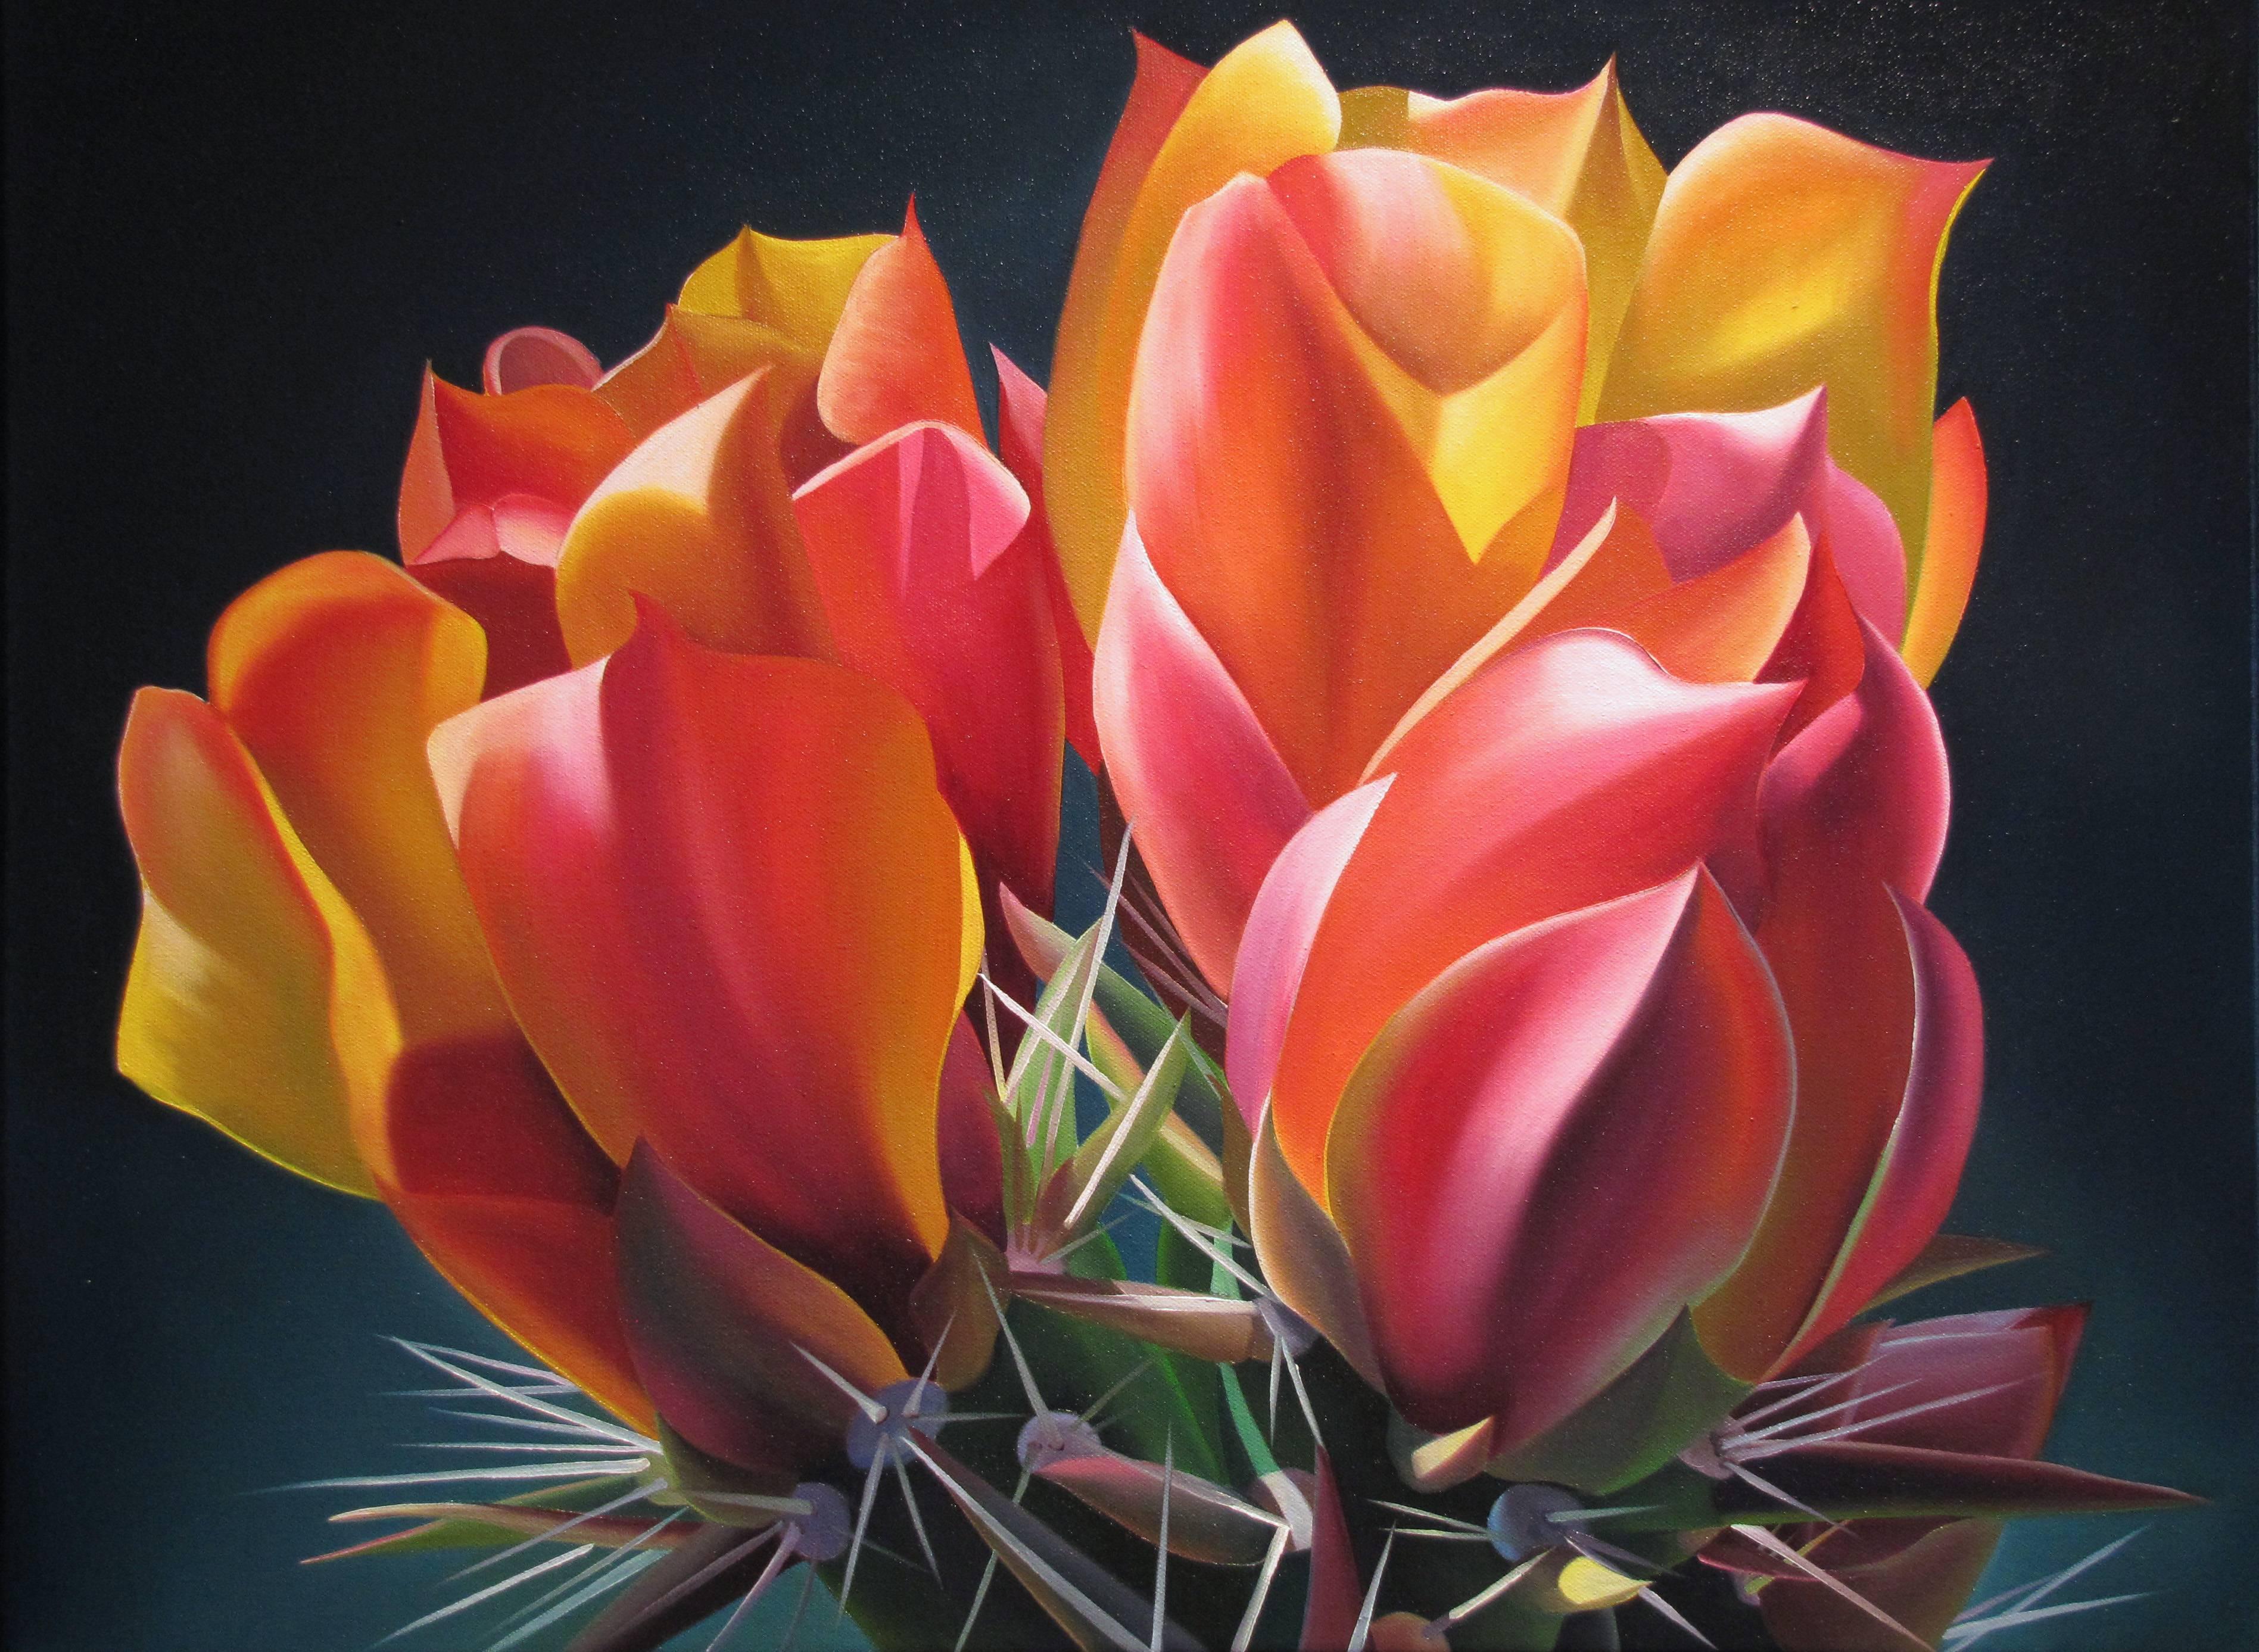 Dyana Hesson Still-Life Painting - "Superstition Treasure, Fire Agate Cholla Bloom"